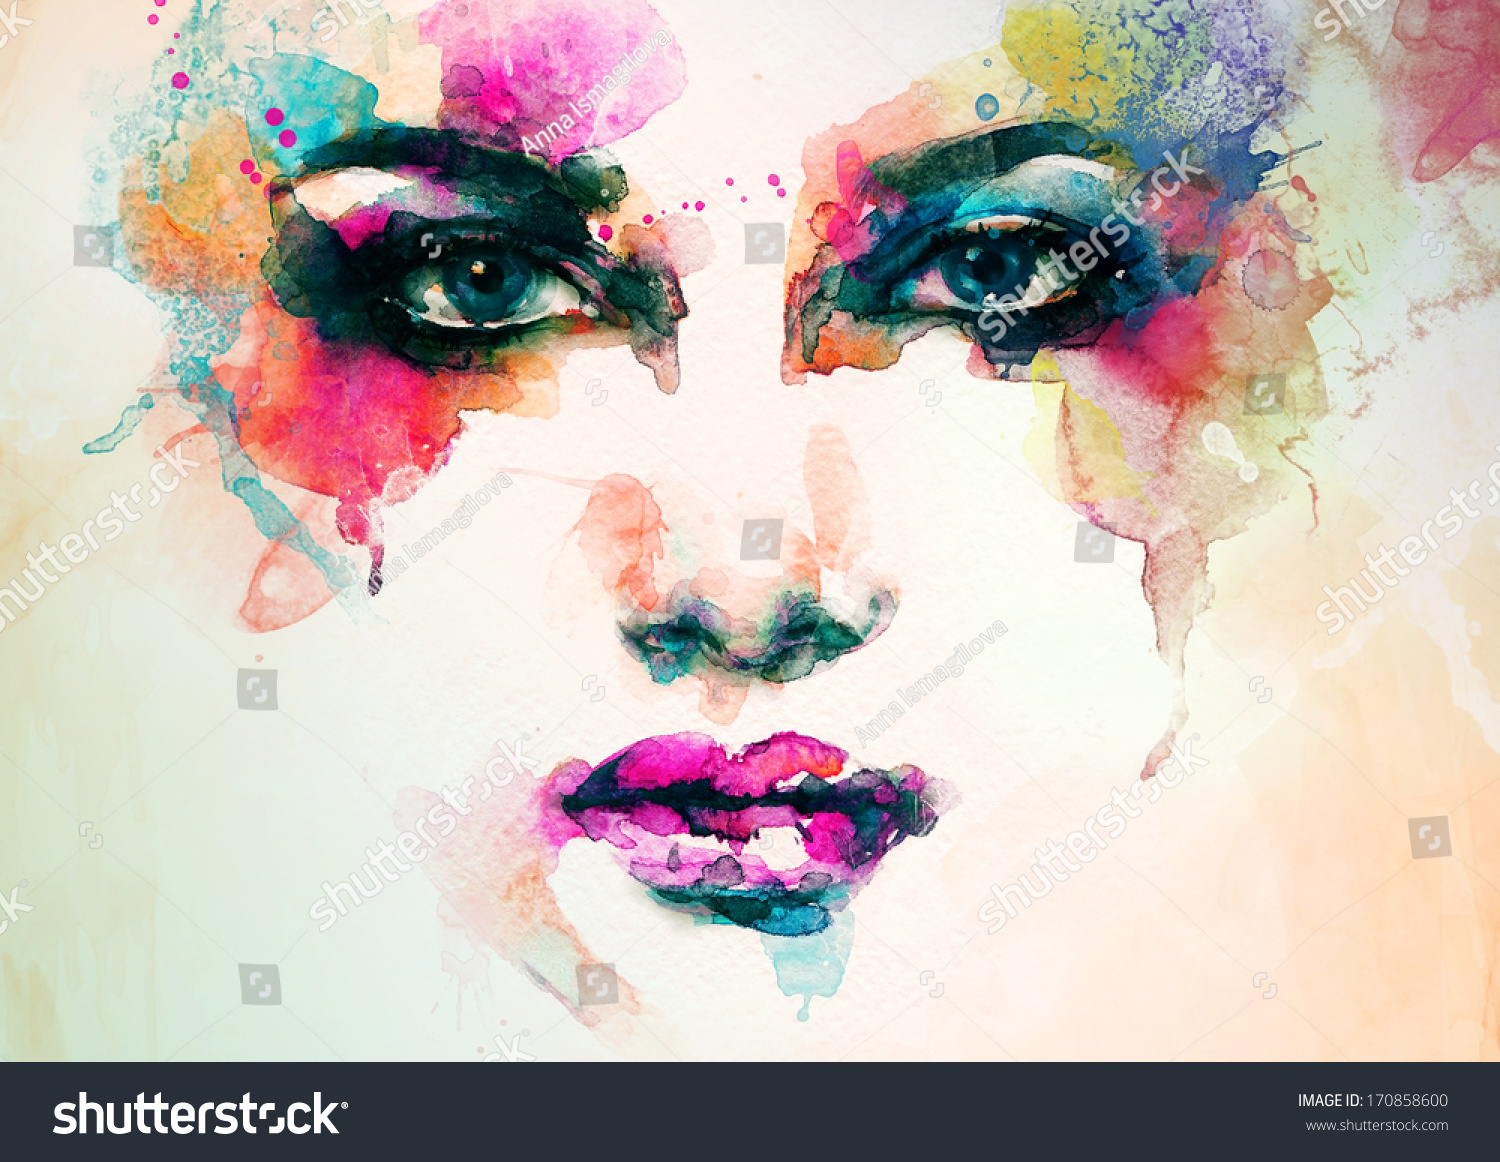 Abstract Woman Face Watercolor Illustration Stock 